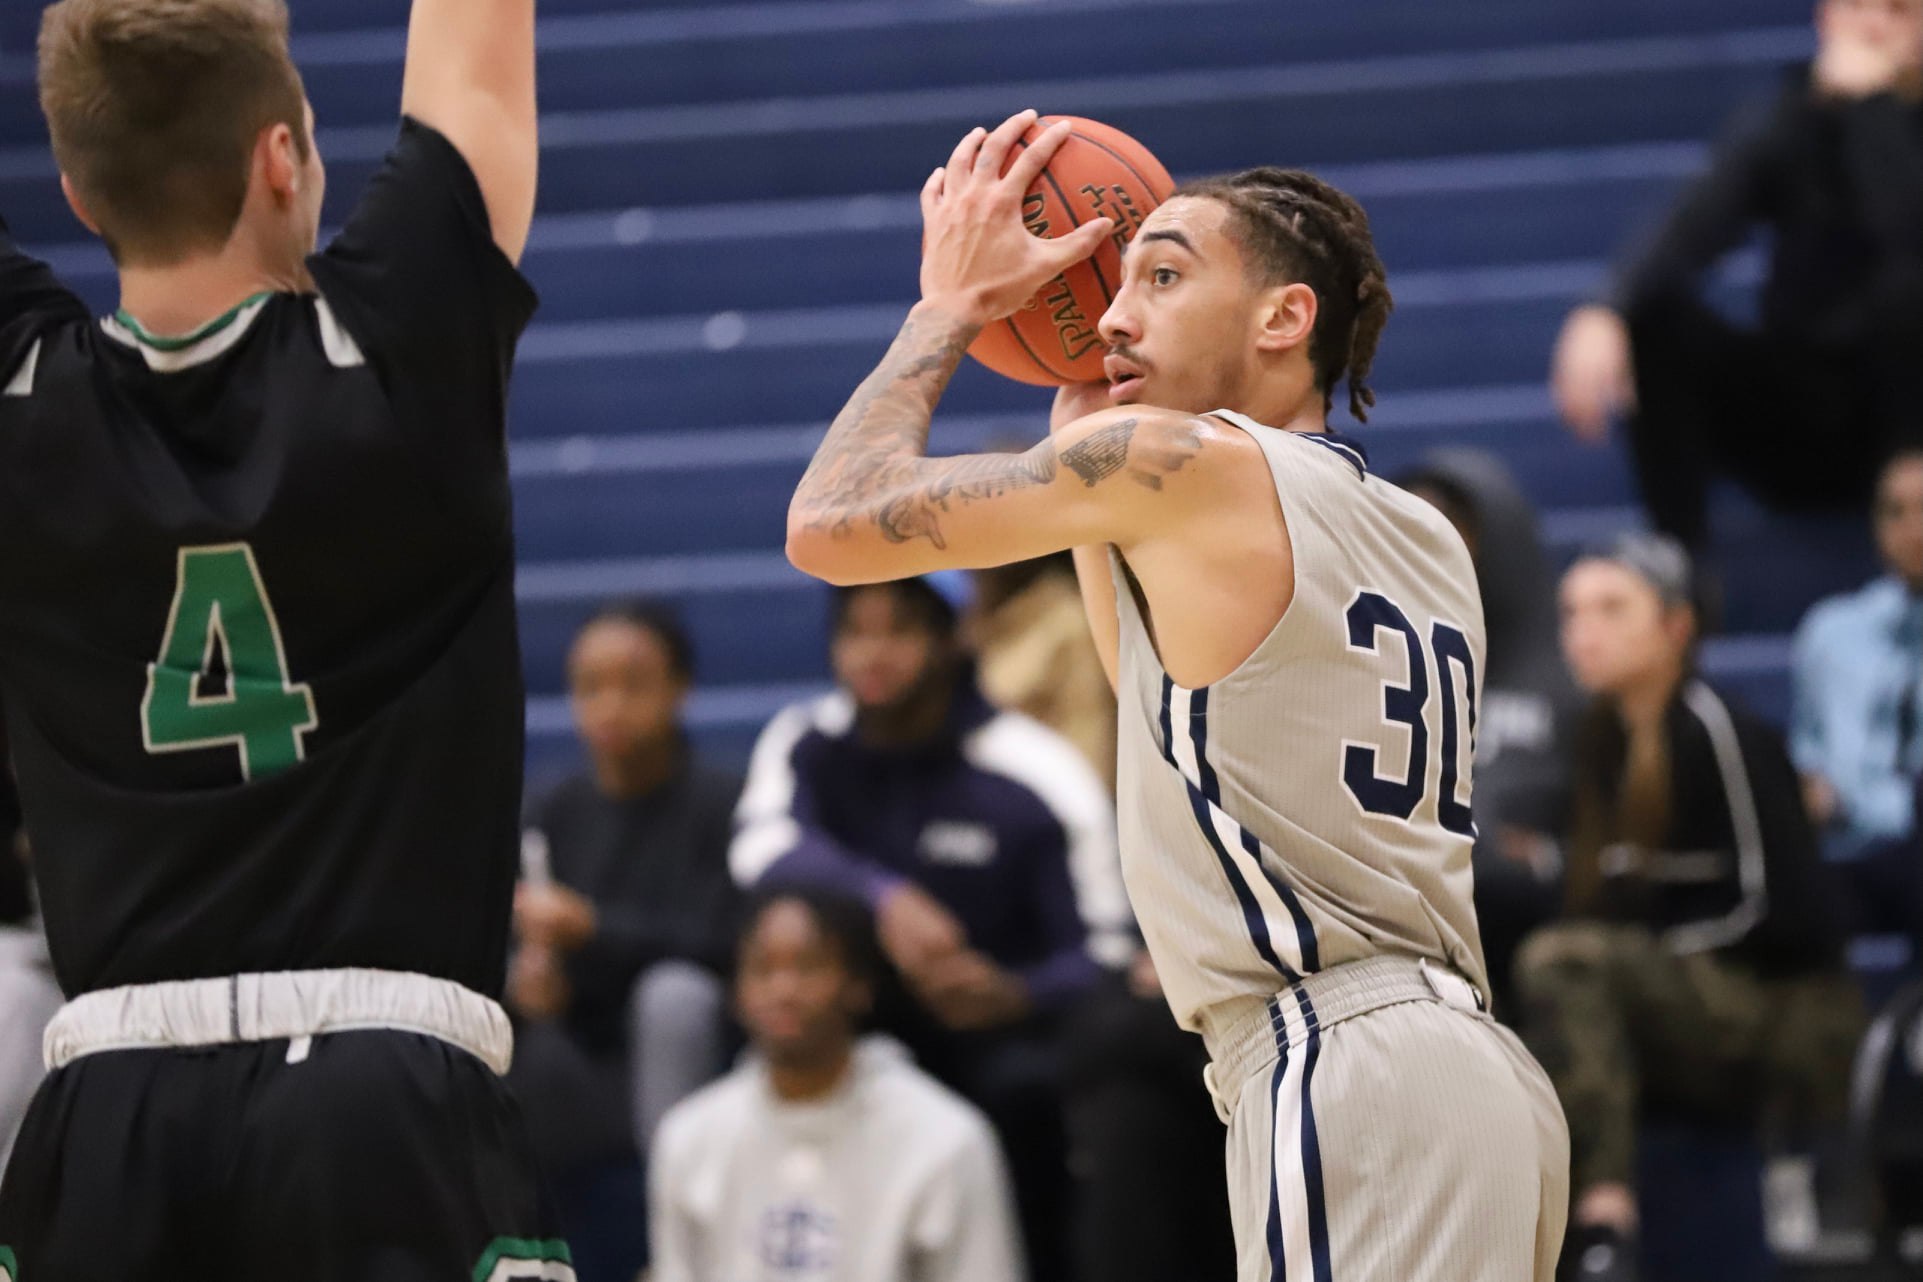 Iowa Central falls on the road, 56-55